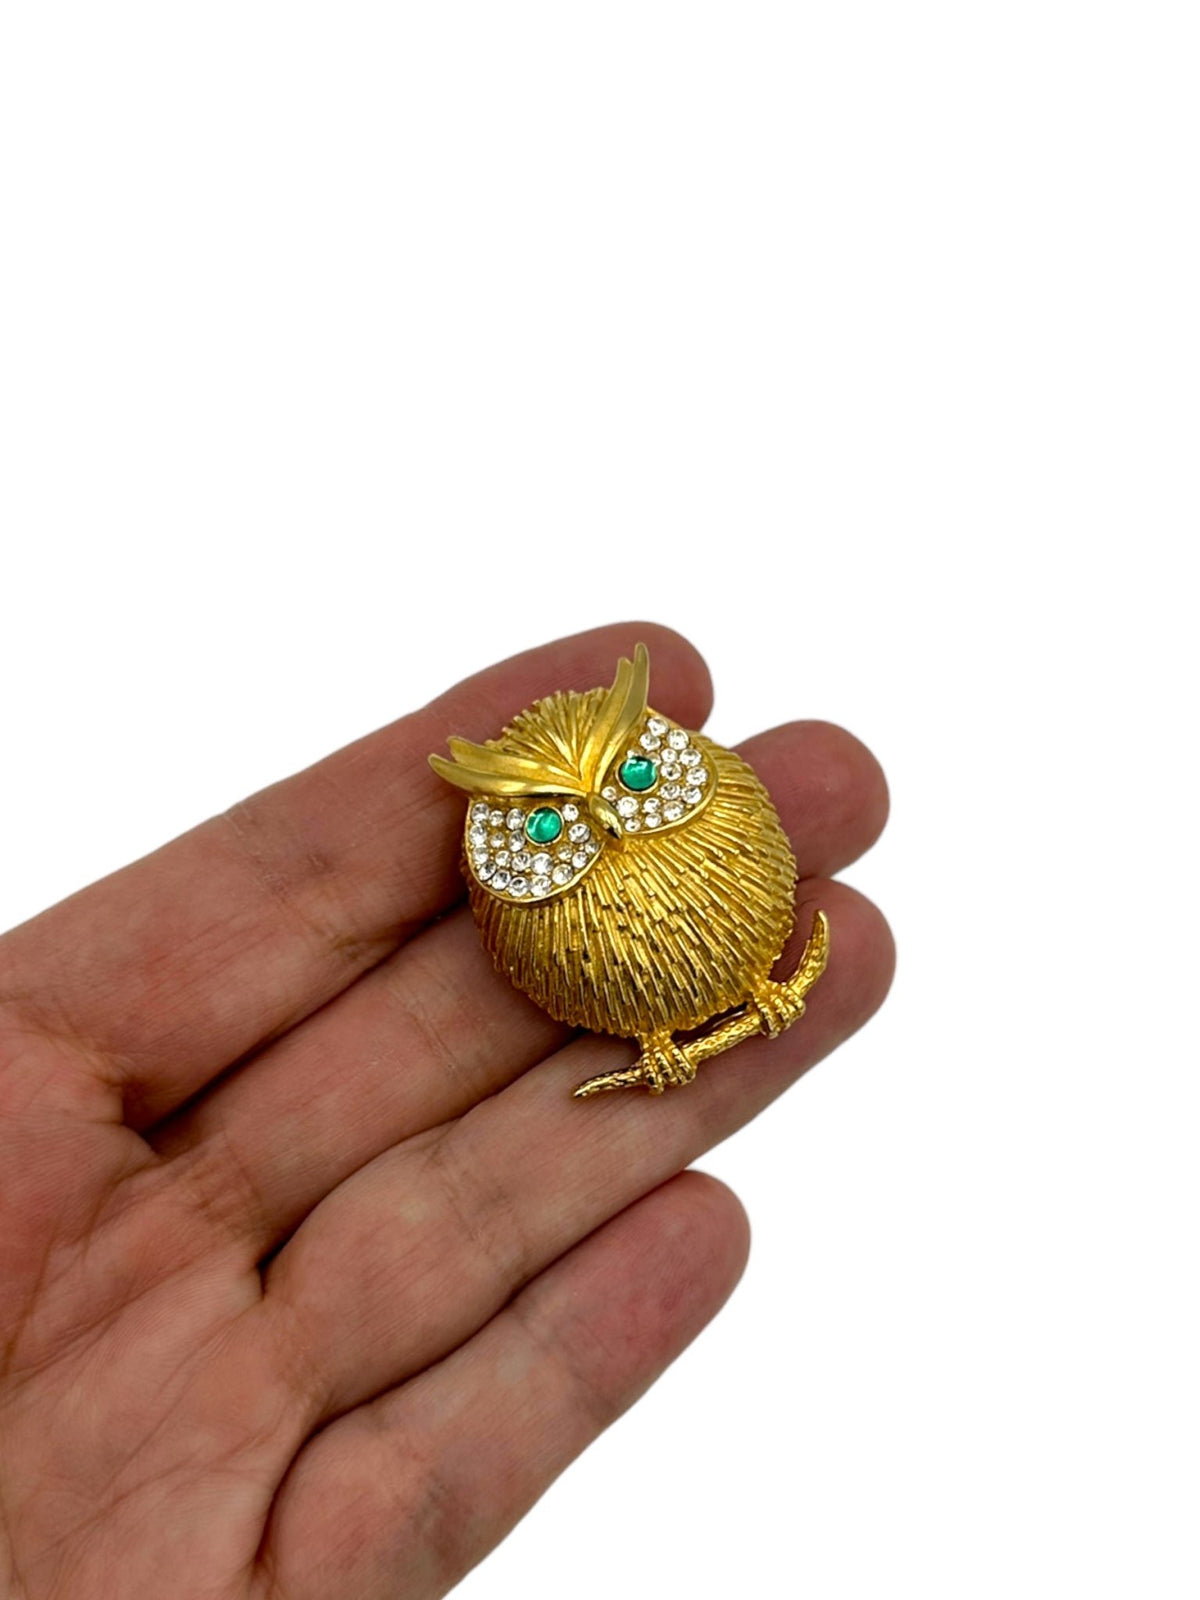 Erwin Pearl PEP Gold Textured Owl Green Eye Brooch - 24 Wishes Vintage Jewelry